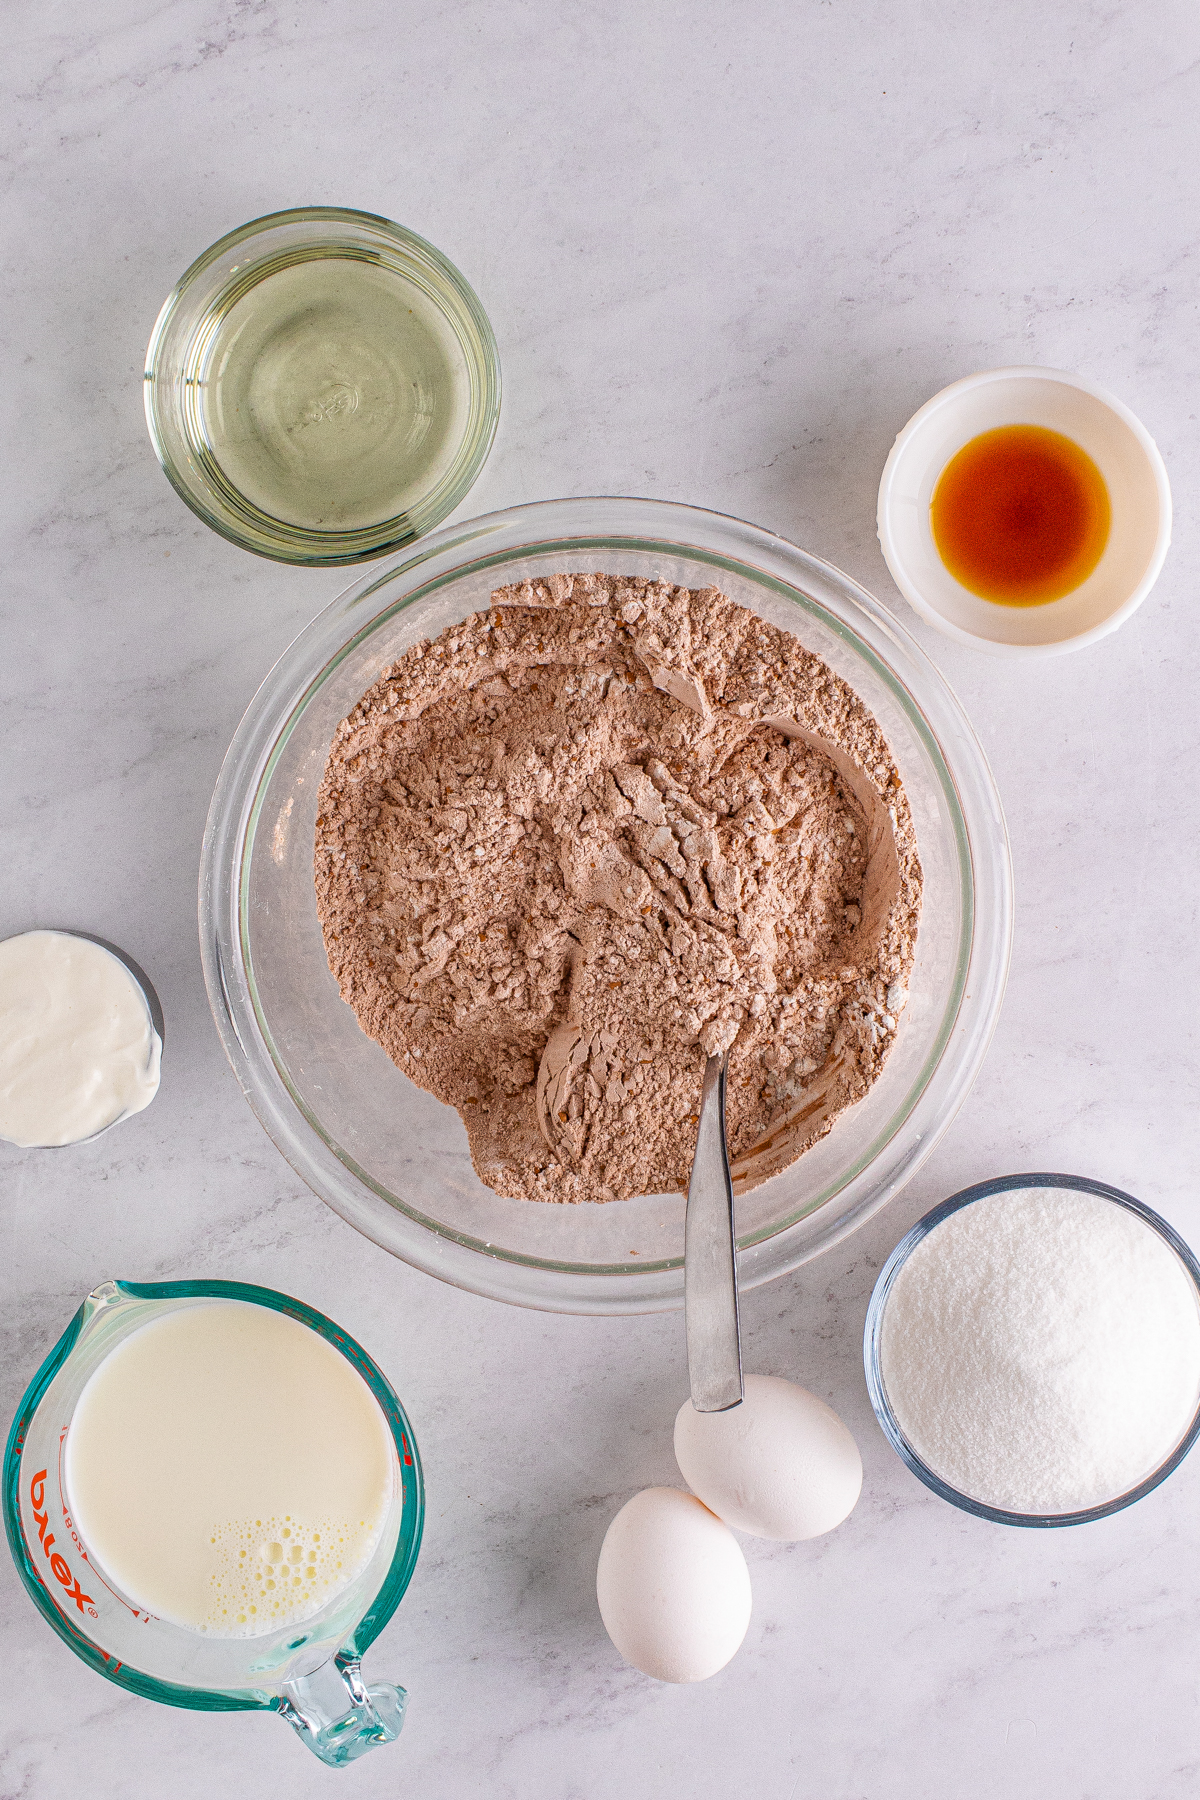 dry ingredients for Nutella muffins in a glass bowl